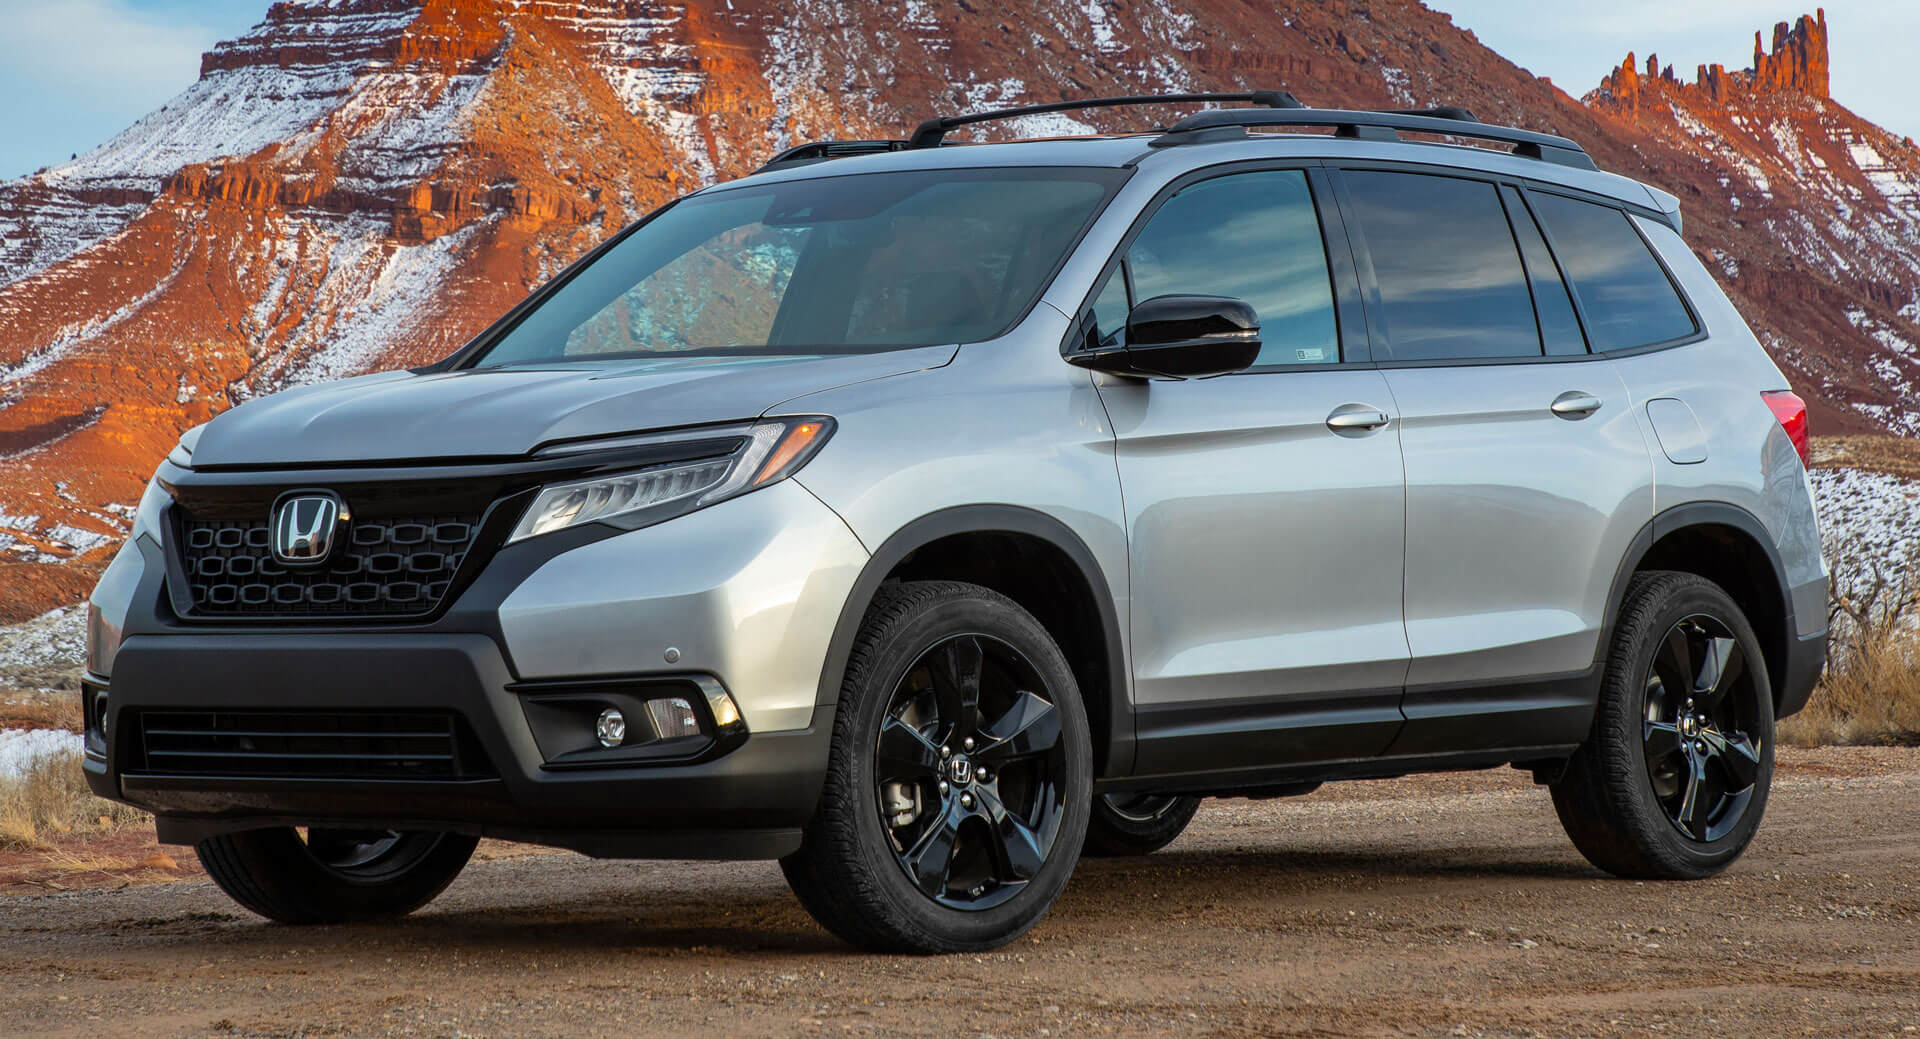 2020MY Honda Passport Doesn’t Bring Anything New But Costs A Bit More